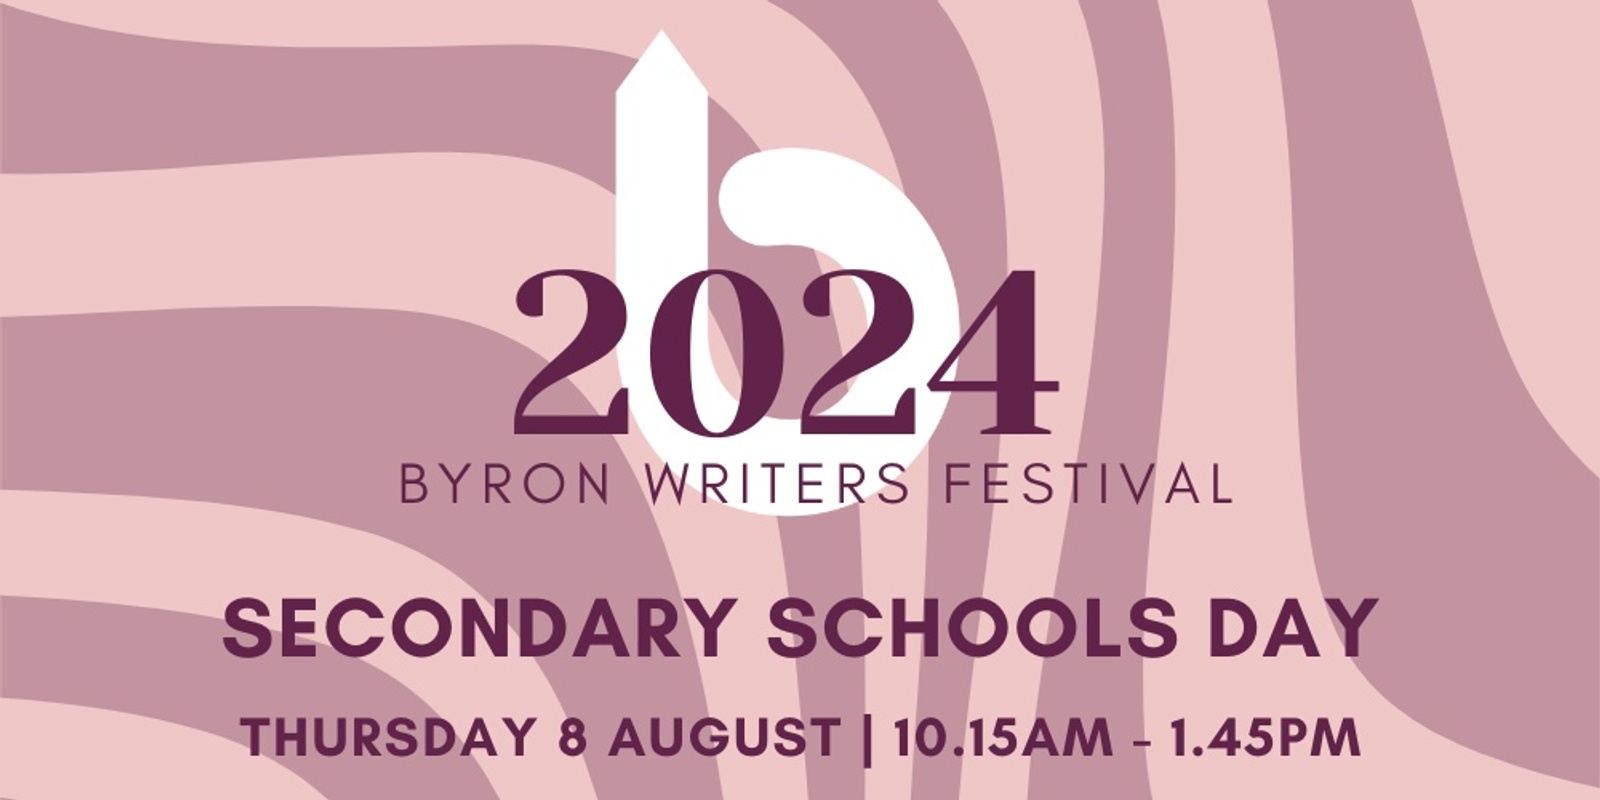 Banner image for Byron Writers Festival 2024 Secondary Schools Day